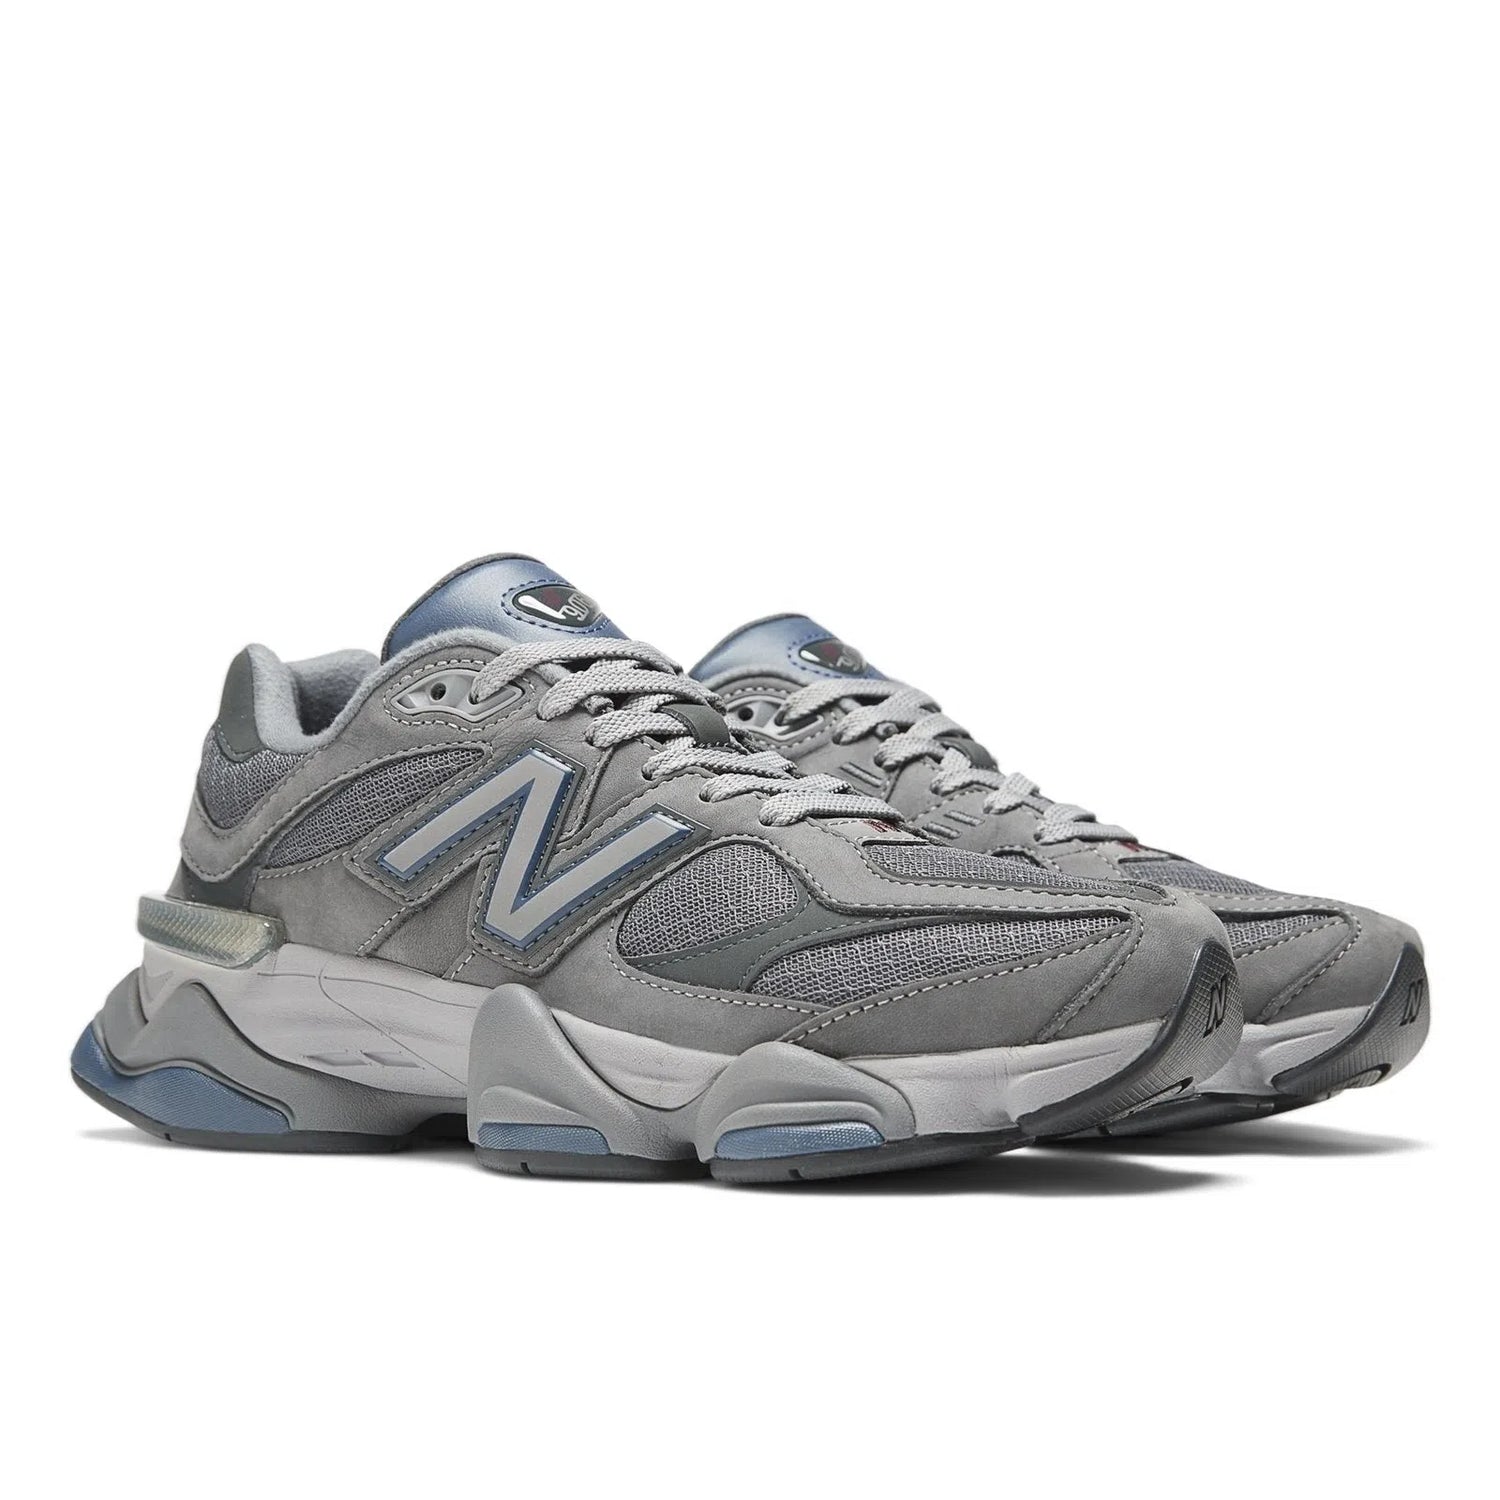 New Balance 9060 Castlerock with Nb Navy and Silver Metallic-LOTABY